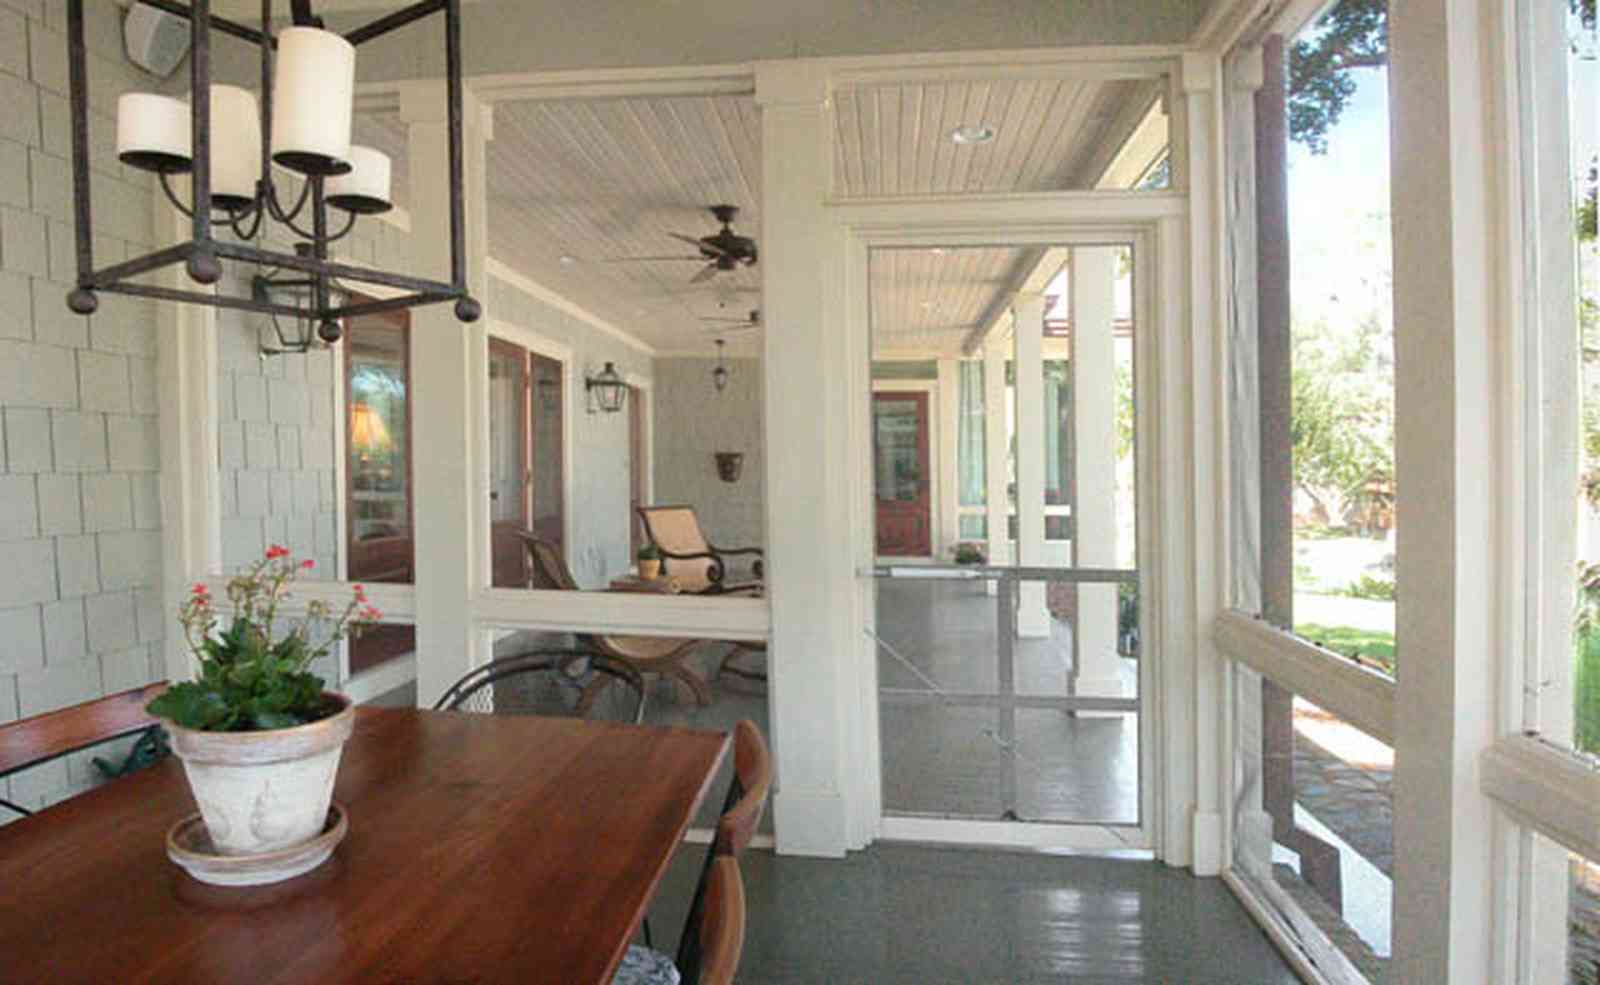 East-Hill:-2109-Whaley-Drive_14.jpg:  dining table, screen porch, wrought-iron lantern, wood shingles, ceiling fan, front porch